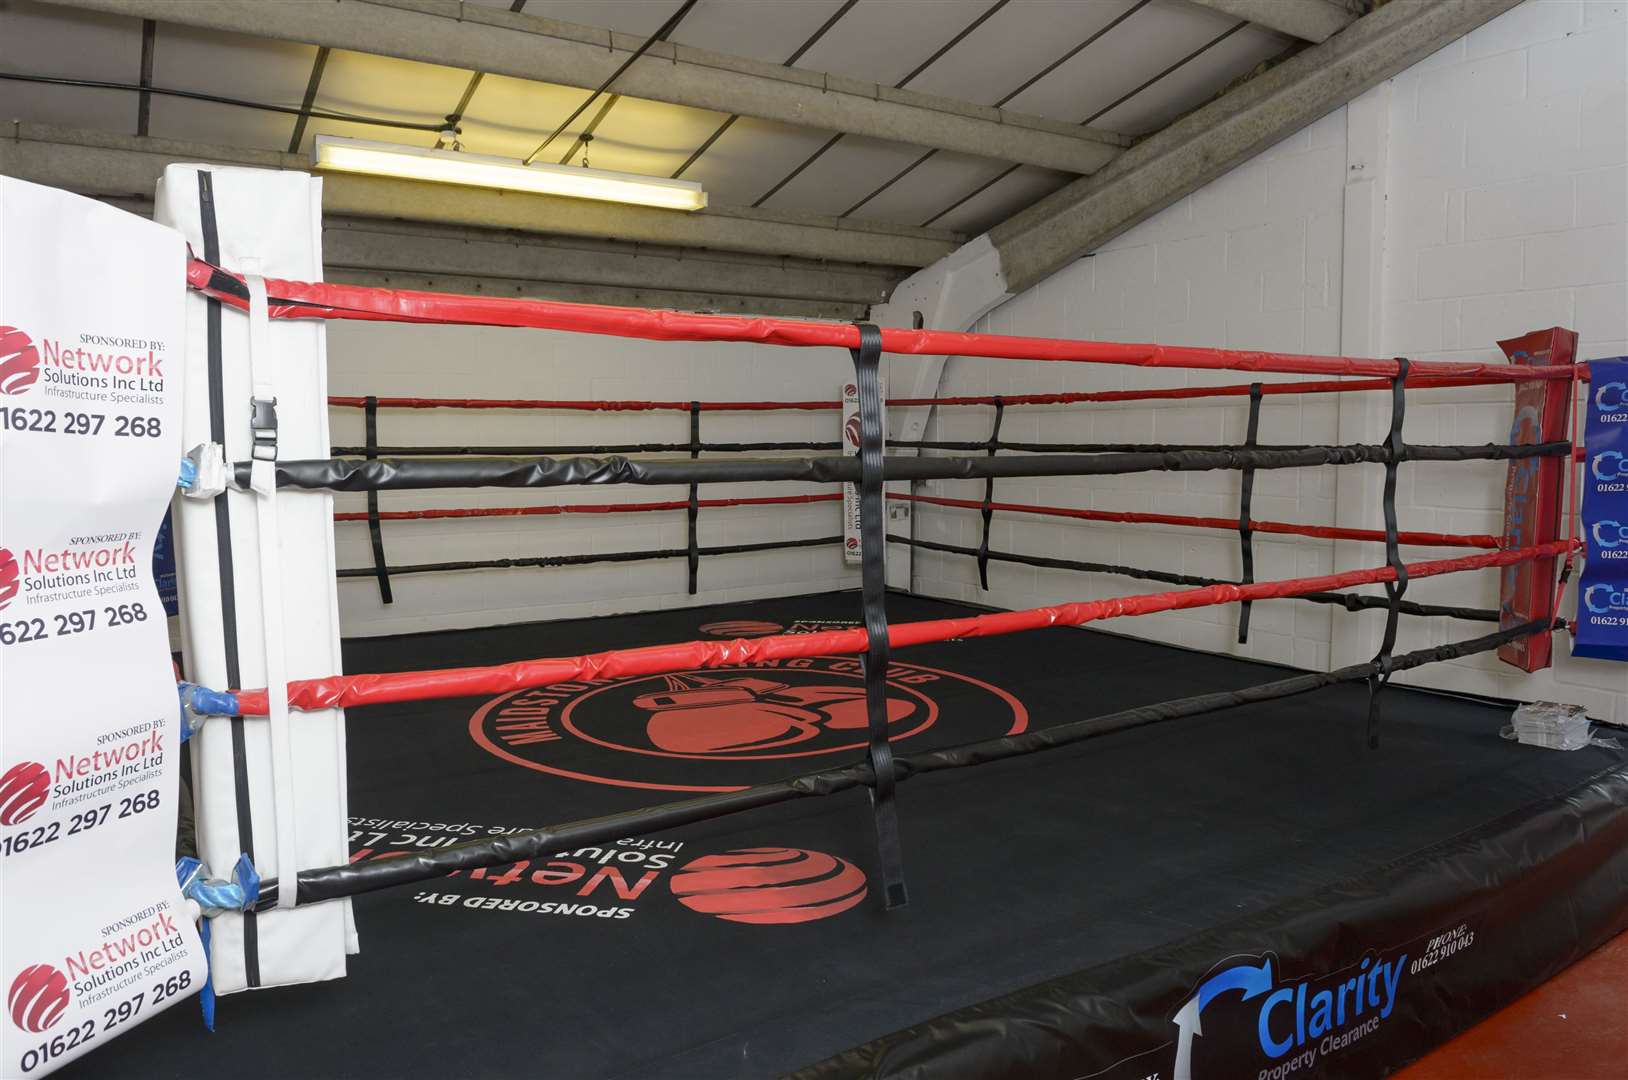 Maidstone Boxing Club within Heather House, Maidstone. Picture: Andy Payton